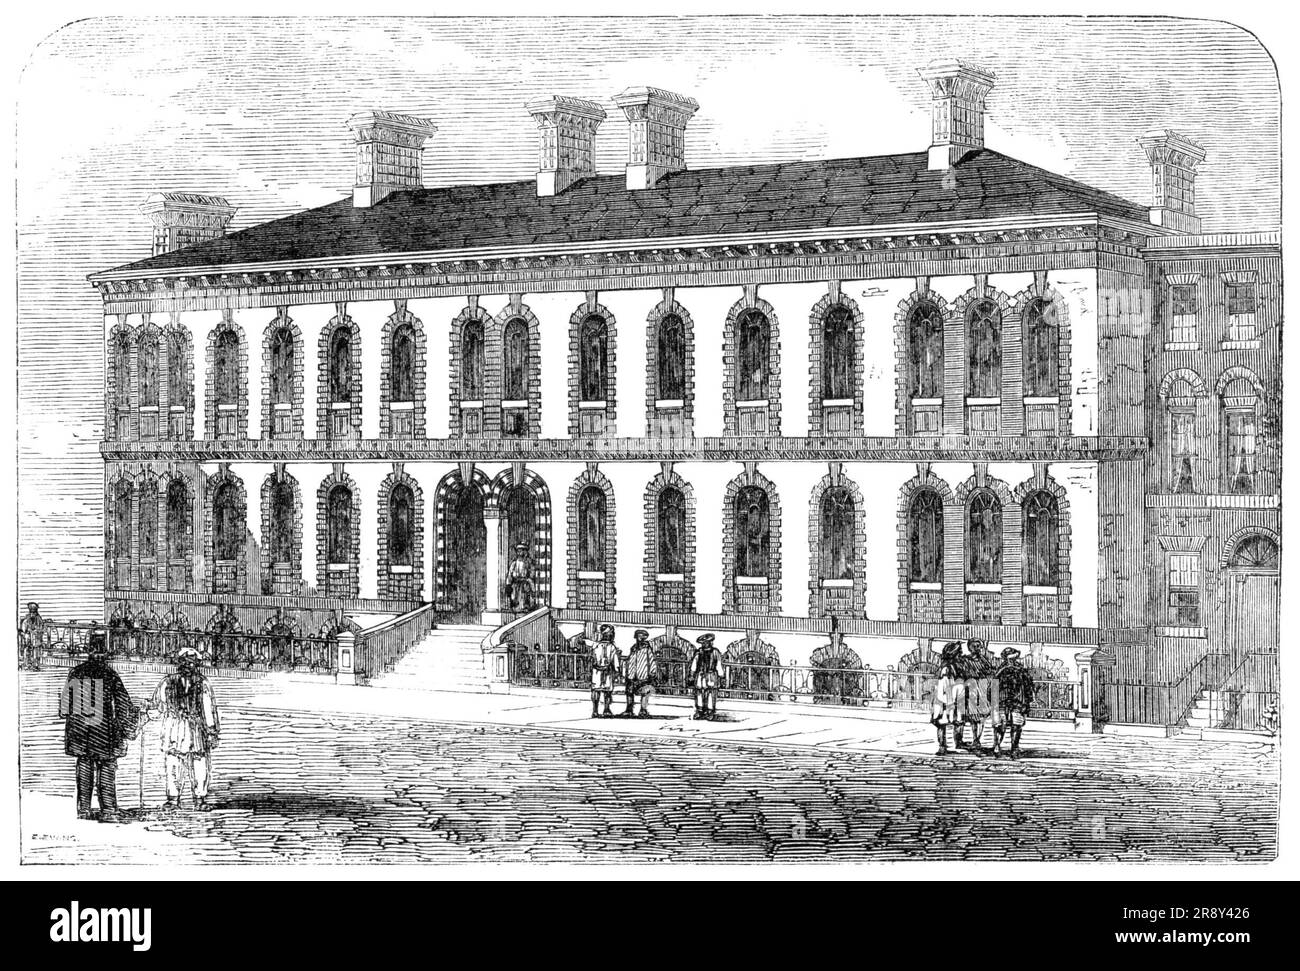 &quot;The Strangers' Home&quot;, West India Dock Road, Limehouse, [London], 1857. Lodgings for seamen. 'The building...is capable of accommodating 230 inmates, with apartments for superintendent, hospital, registry, shipping and secretary's offices, and, including lighting, warming, hot and cold baths and lavatories...The object of the institution is to offer to Indian sailors and other Orientals who come to England a comfortable and respectable lodging, with wholesome food, at a cost which shall render the institution self-supporting, Lodgers are to pay not less than eight shillings a week, f Stock Photo